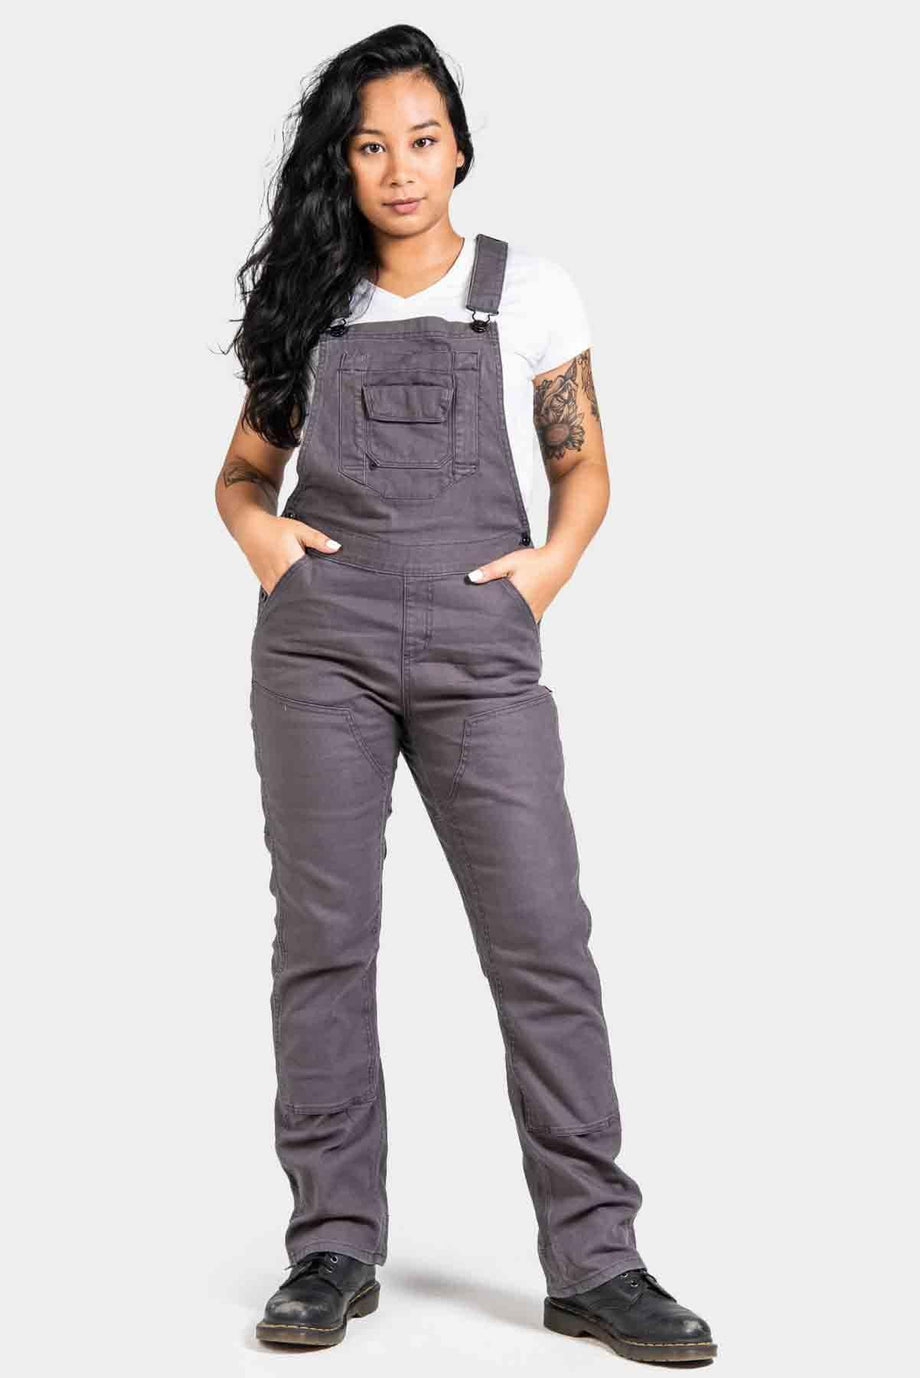 Womens Fashion Slim Jeans Jumpsuit Denim Overall Hot Shorts Suspenders  Dungarees